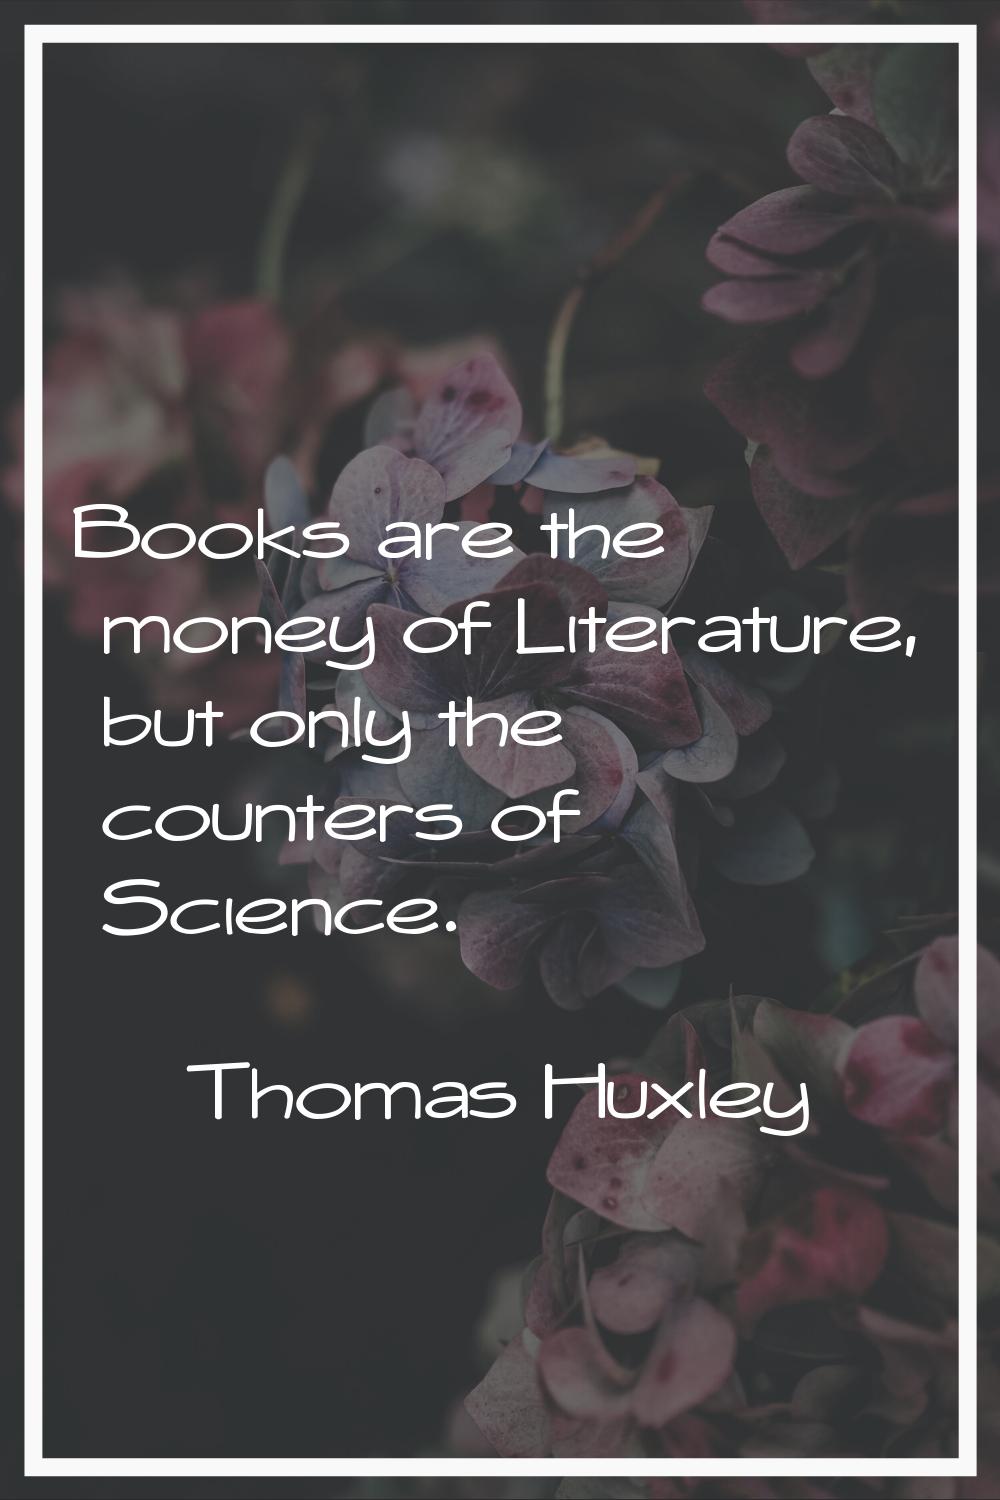 Books are the money of Literature, but only the counters of Science.